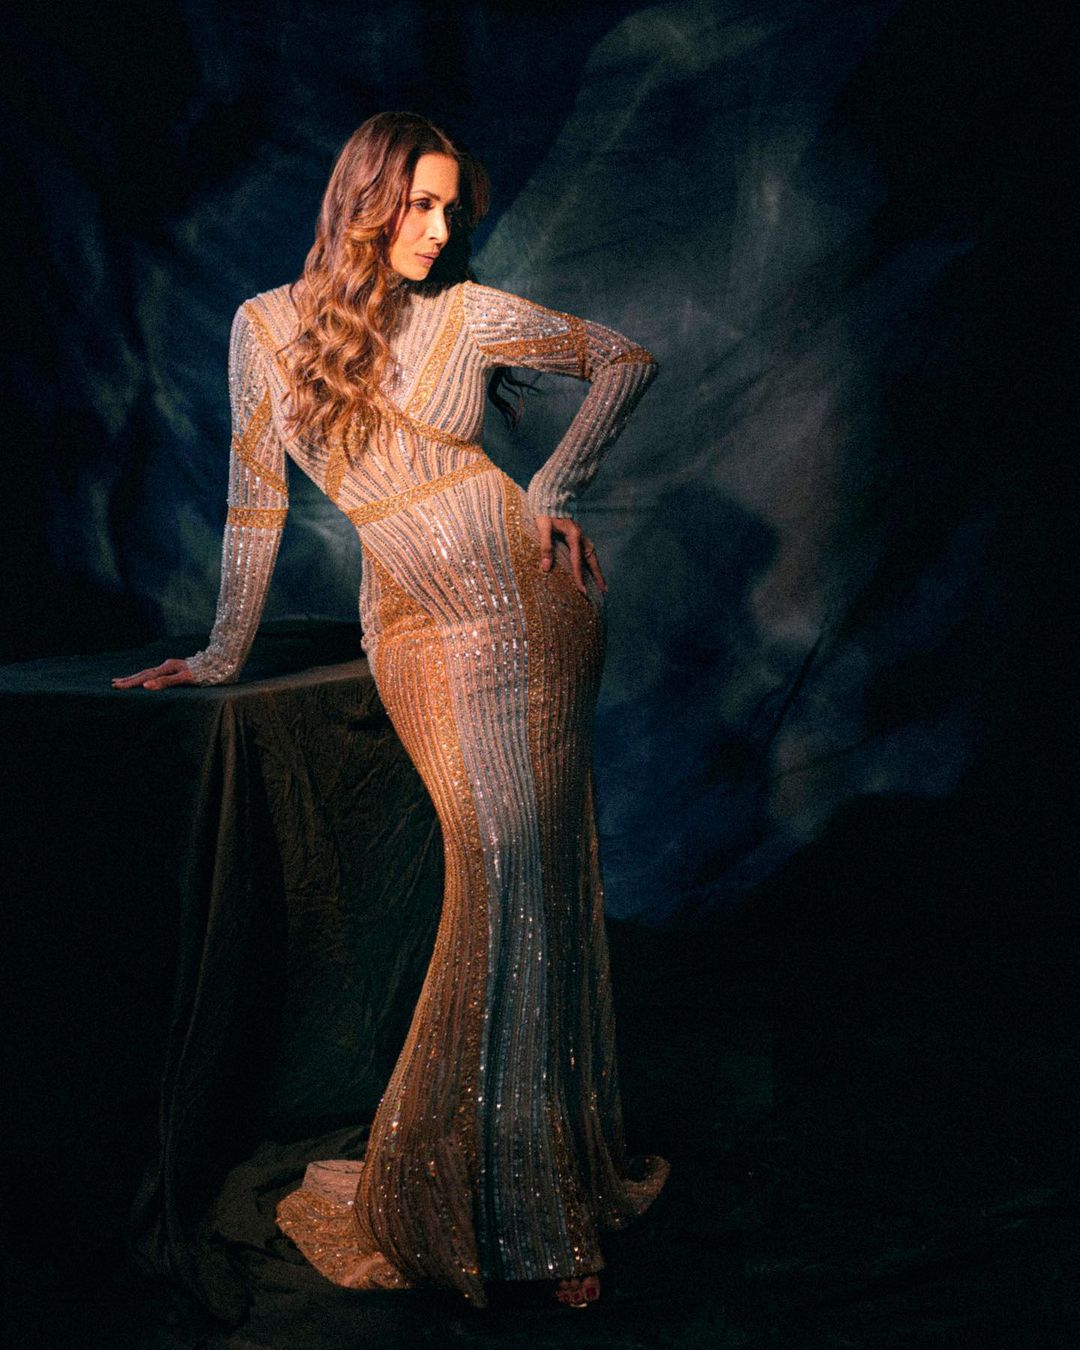 Malaika Arora Will Make You Swoon With Her Glamorous Photoshoot In Sequin  Gown, See The Diva's Sexy Pictures